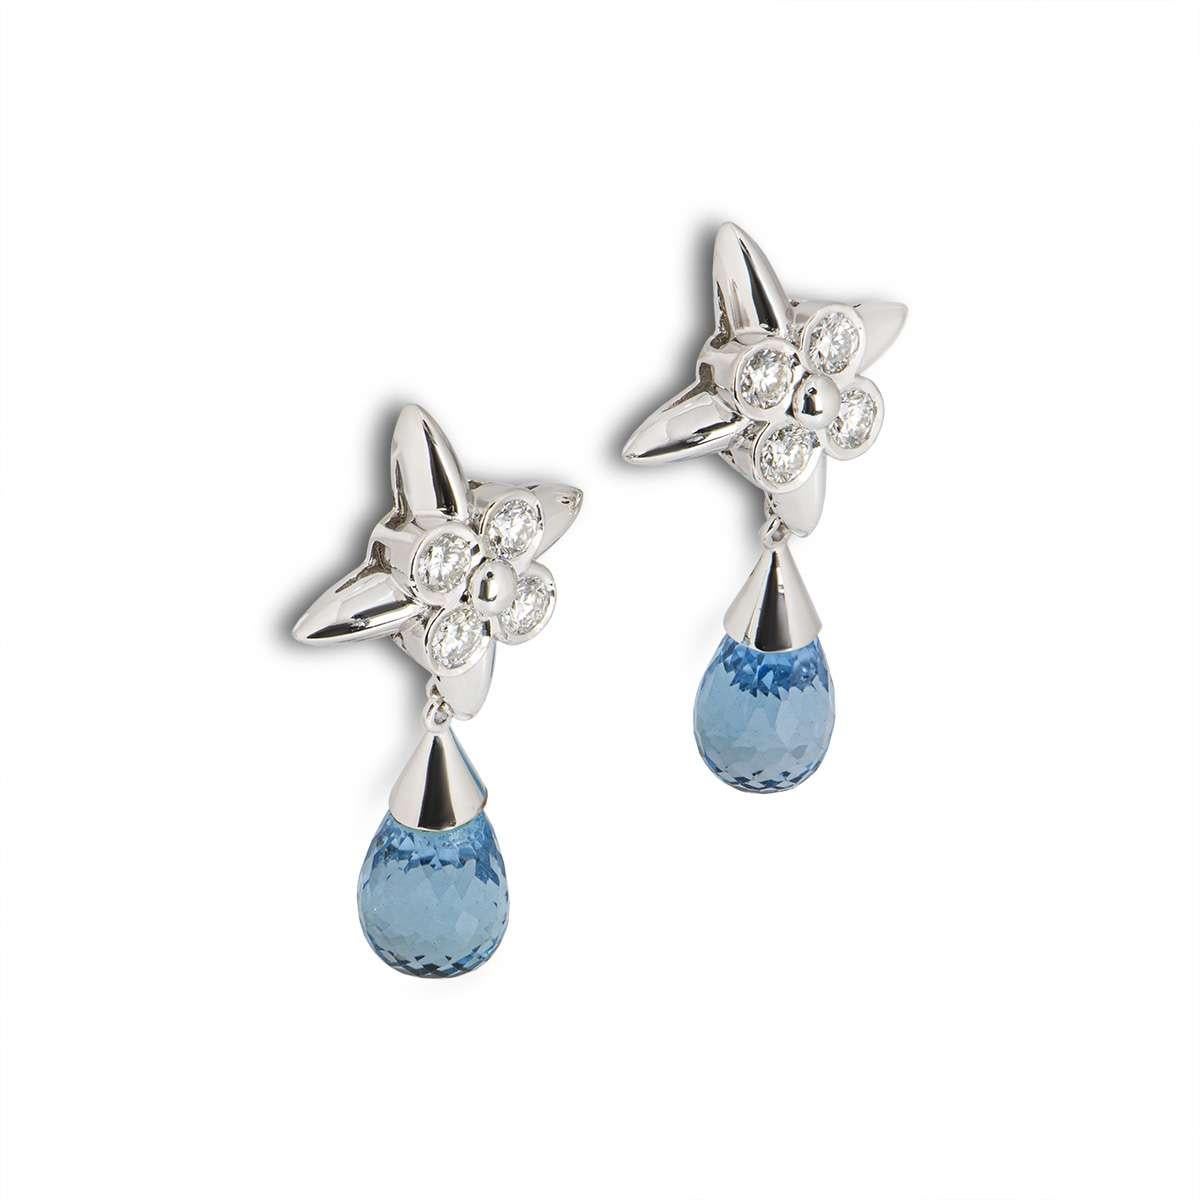 A pair of 18k white gold drop earrings. The earrings feature a flower motif set with diamonds, complemented by a briolette cut blue topaz. There are 8 diamonds in total with a weight of 0.72ct and 2 topaz totalling 9.83ct. The earrings measure 3.1cm